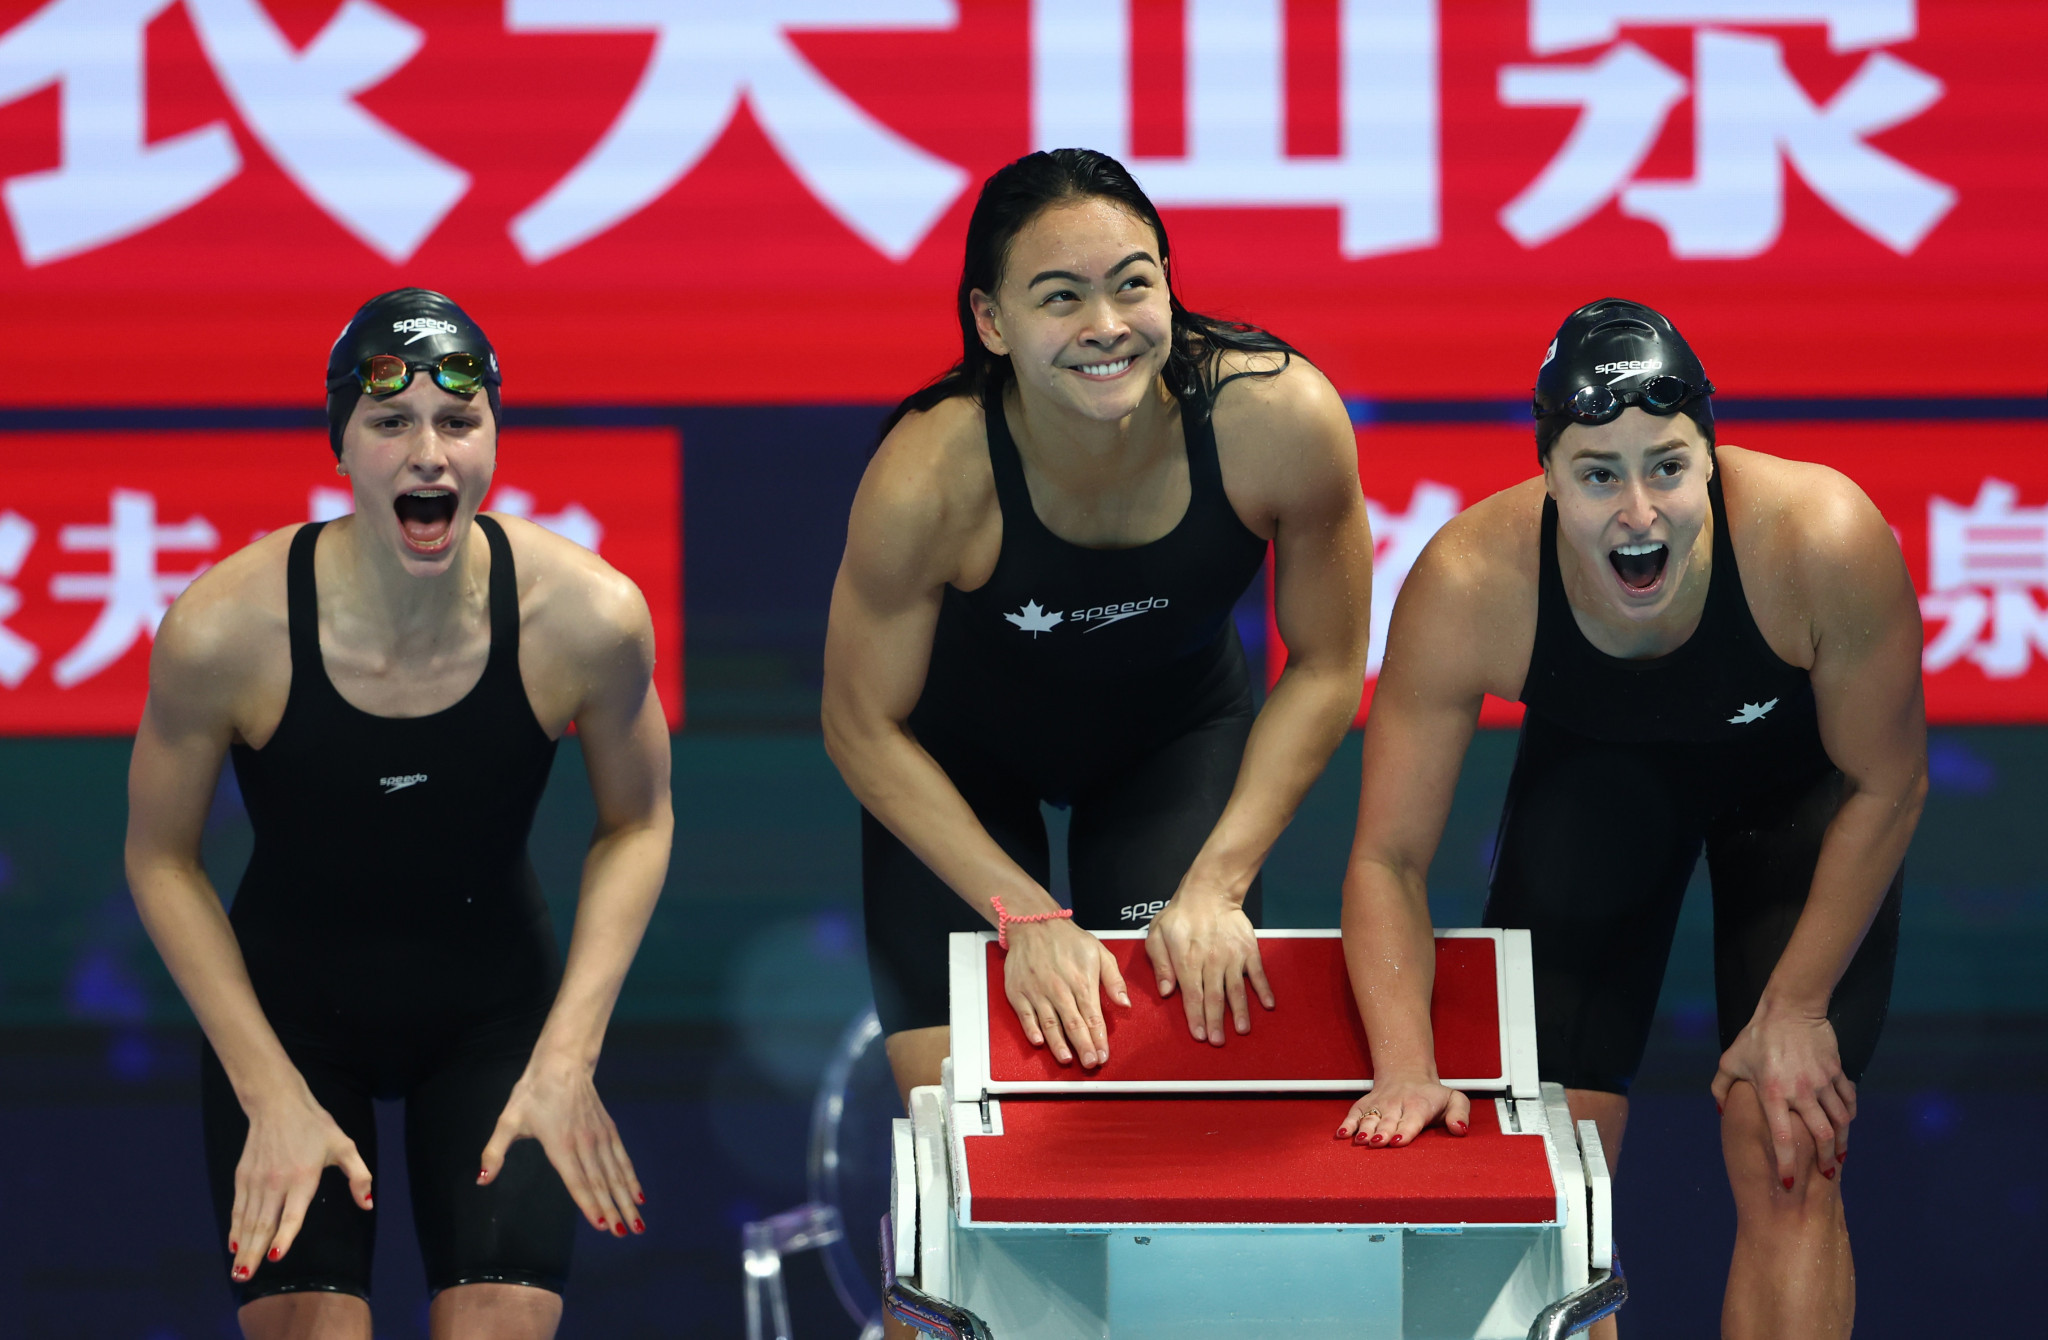 Summer MacIntosh, Kayla Sanchez and Katerine Savard cheer on Canadian teammate Rebecca Smith in the women's 4x200m freestyle relay final ©Getty Images